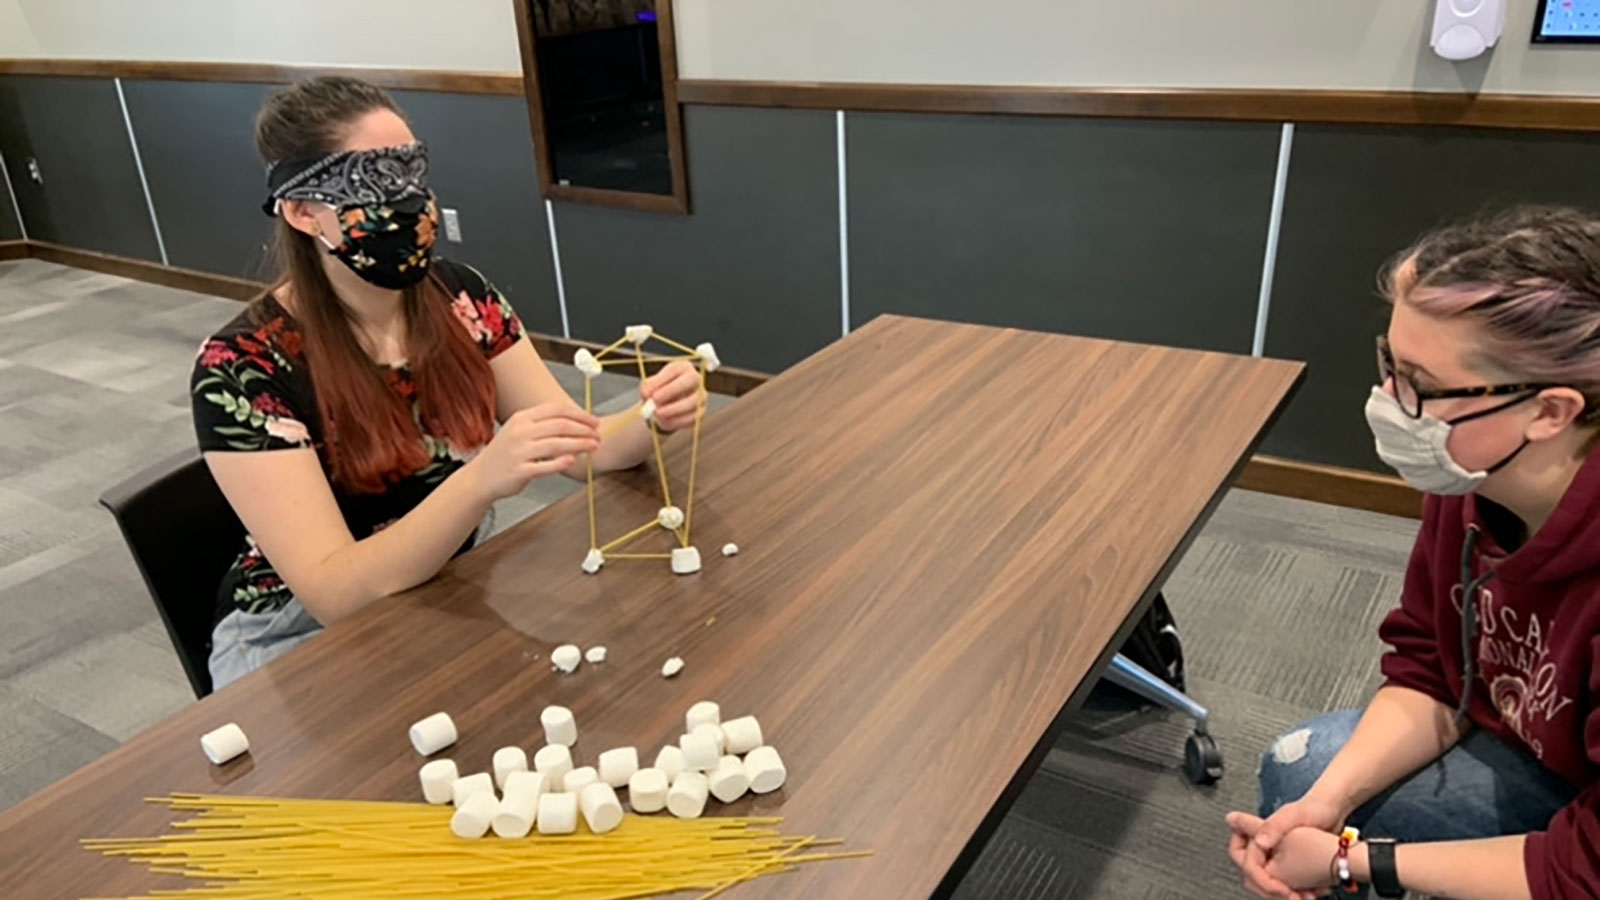 A team of 2 oSTEM members work together blindfolded to create a spaghetti tower building at a COVID-friendly event in 2020.